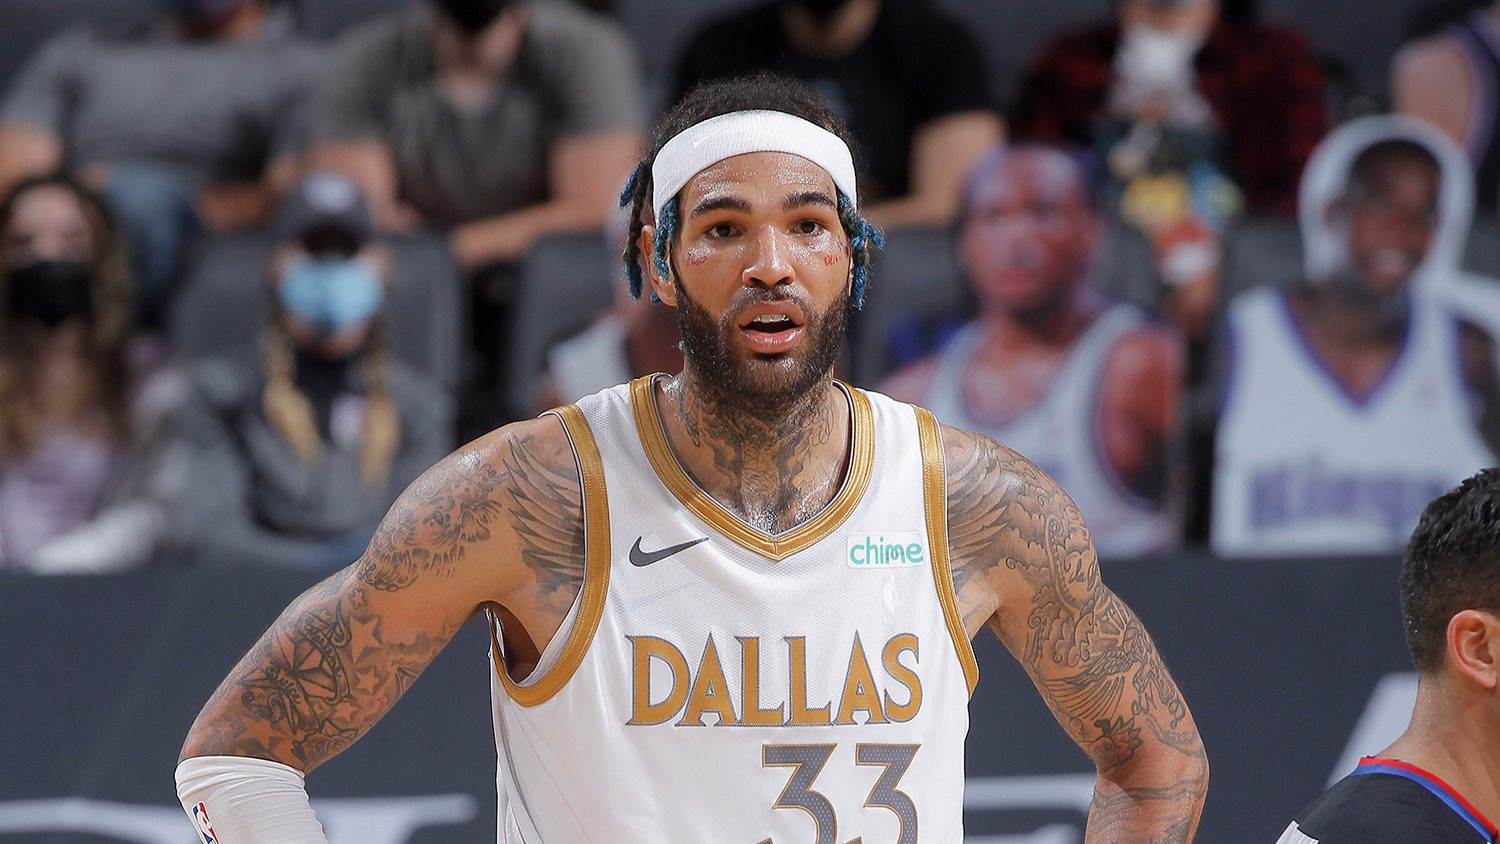 Willie Cauley-Stein Agrees to One-Year Deal With Rockets, Per Report